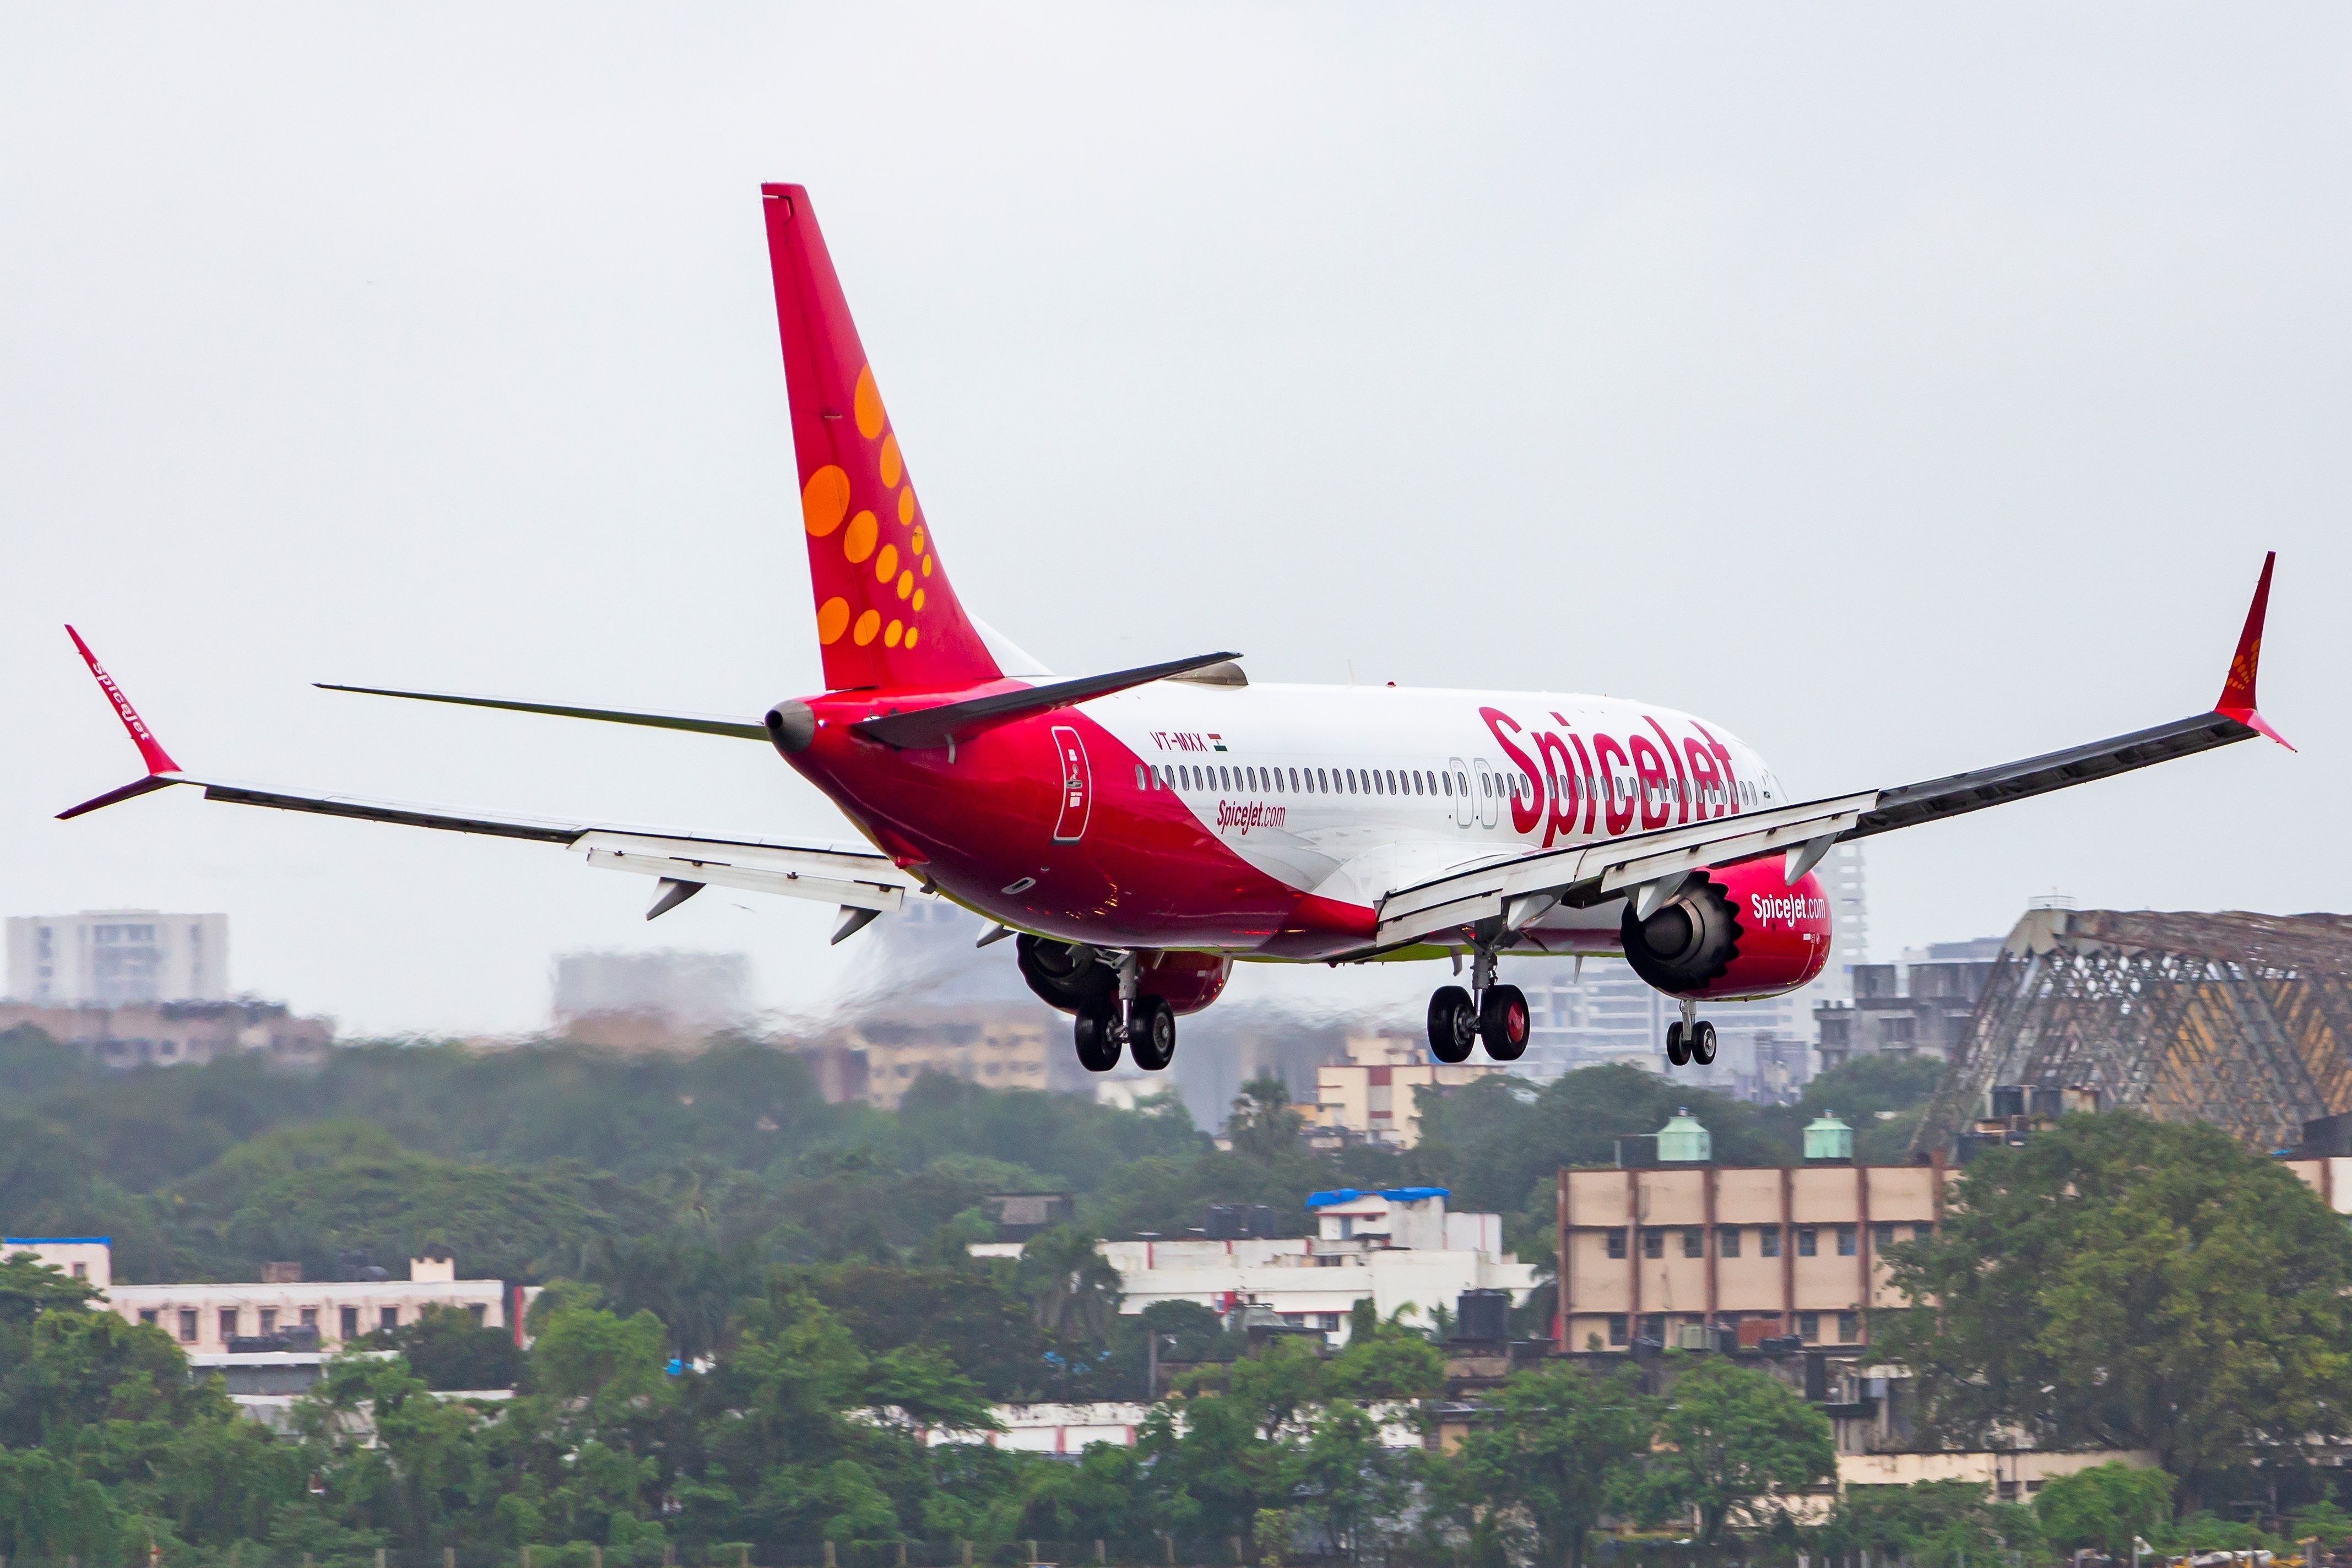 SpiceJet's Boeing 737 MAX 8 approaching the runway at Mumbai Airport.